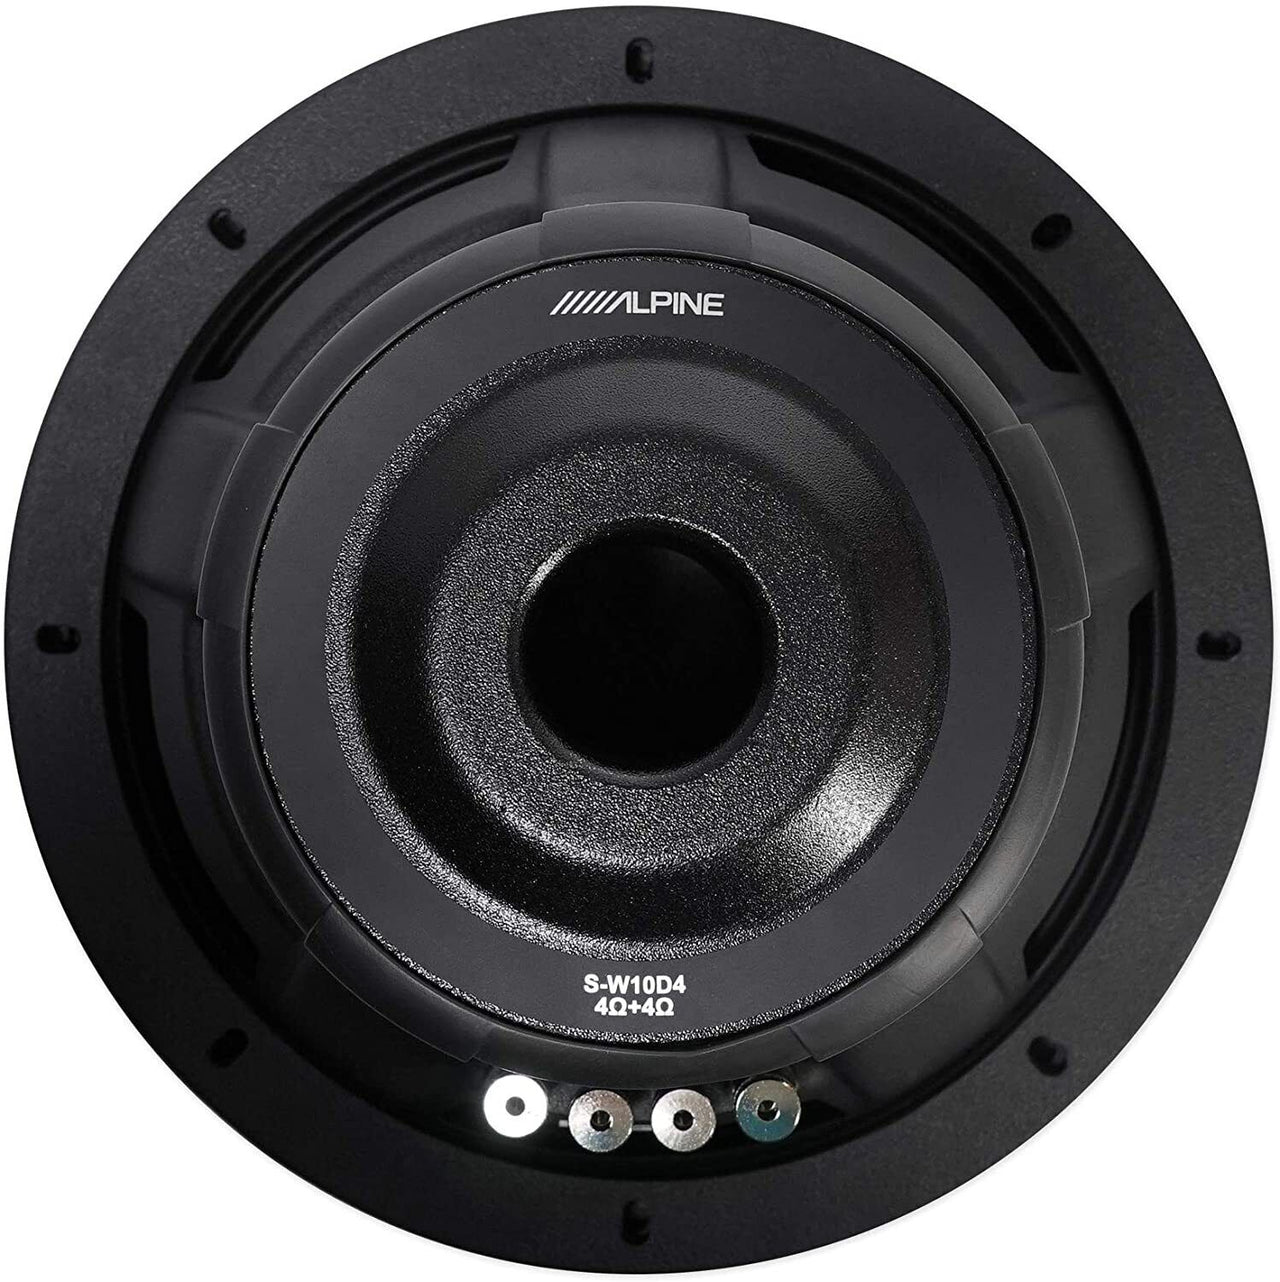 Alpine S-W10D2 Car Subwoofer 1800W 10" Dual 2 Ohm Car Subwoofer with Ported Box